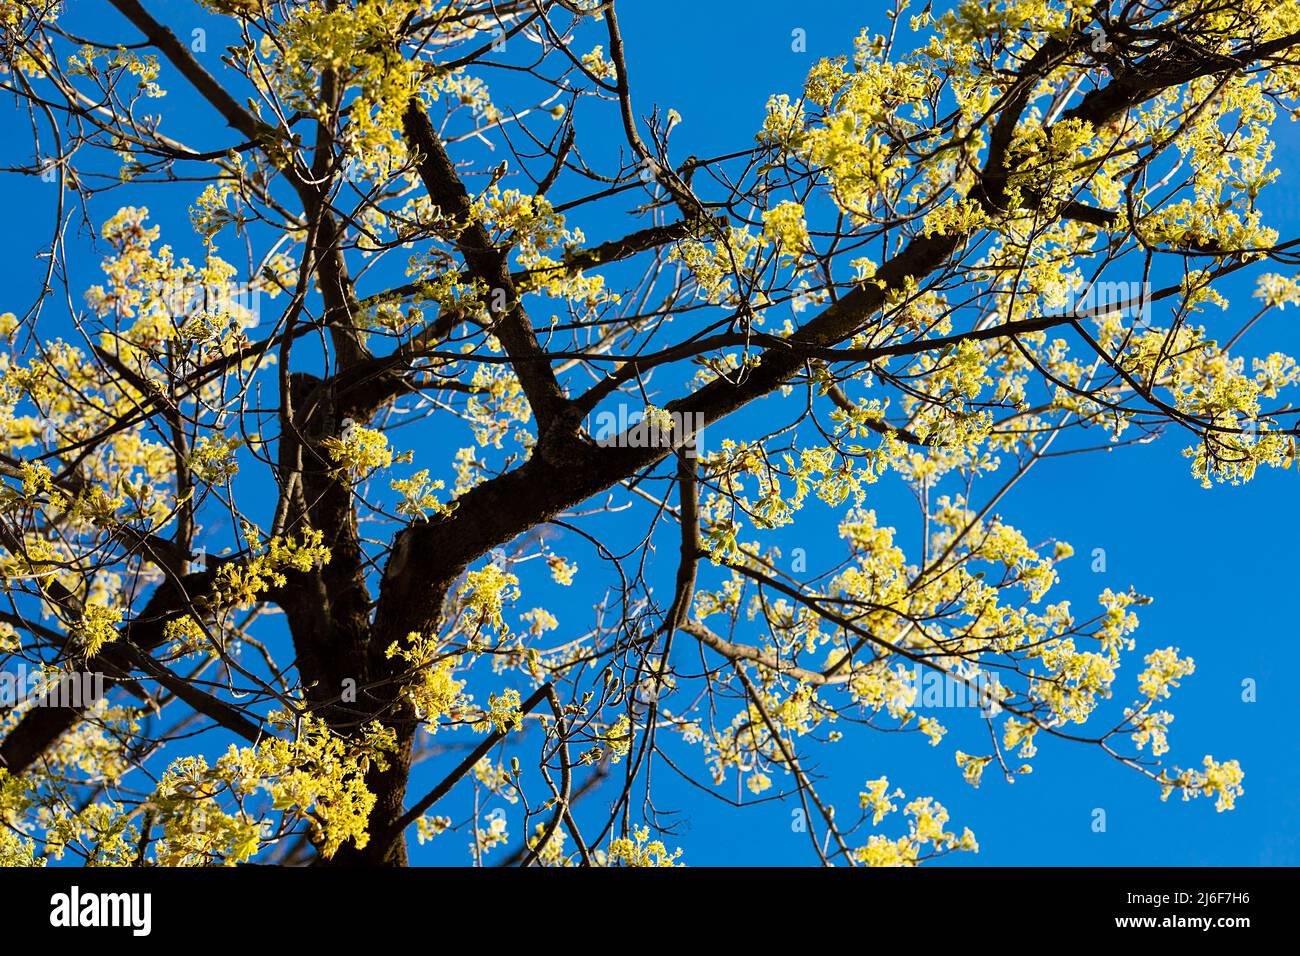 Fresh natural spring yellow flowers and leaves on blue sky, trees, beautiful day, stock photo Stock Photo